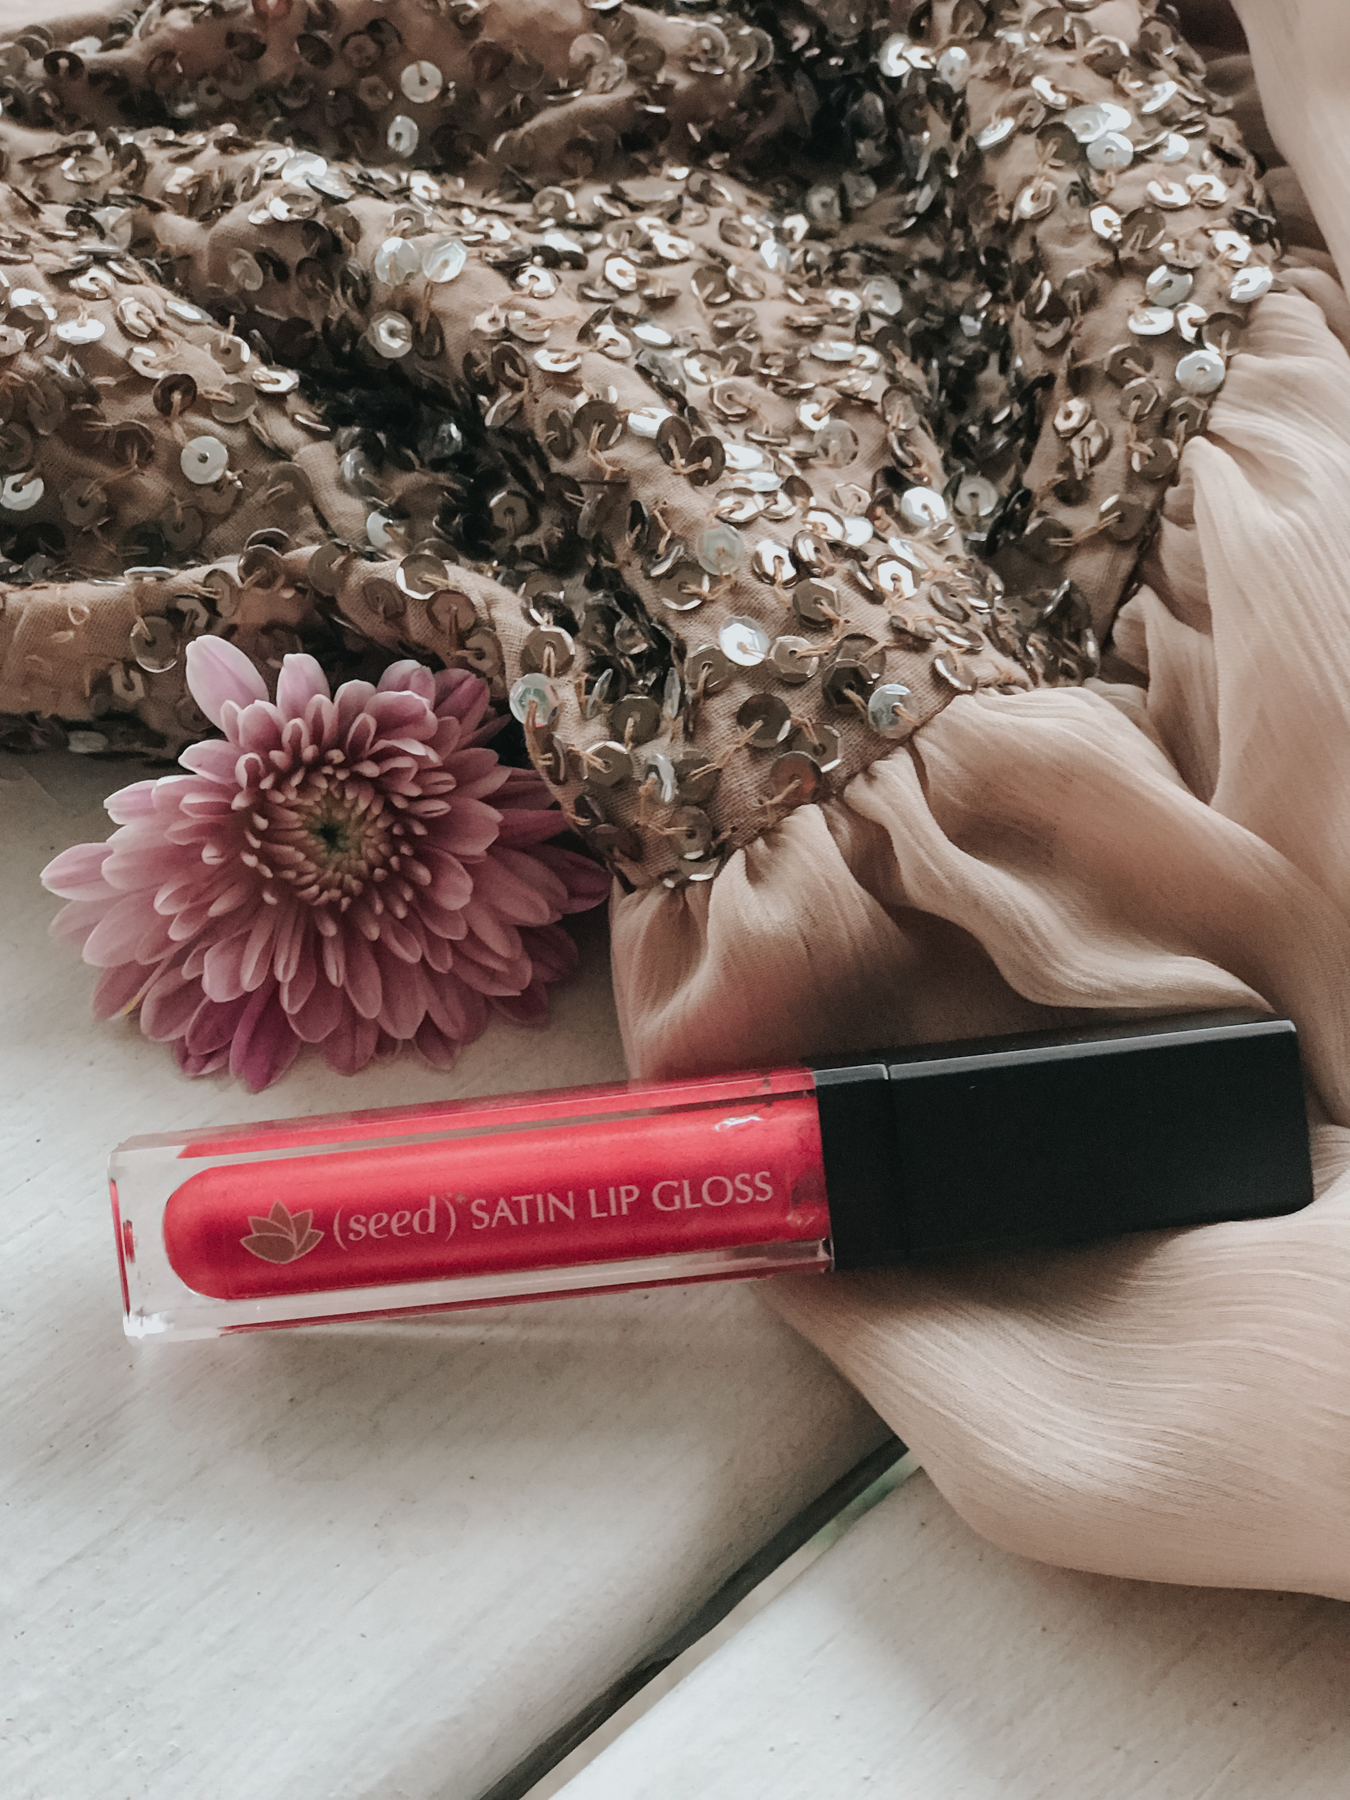 Seed Body Care's Satin Lip Glass softens your lips, is packed with nourishing seed ingredients, and the colors are GORGEOUS. It's also cruelty-free, paraben-free, phthalate-free, and lead-free. This all natural lip color gives a subtle, satiny shine.